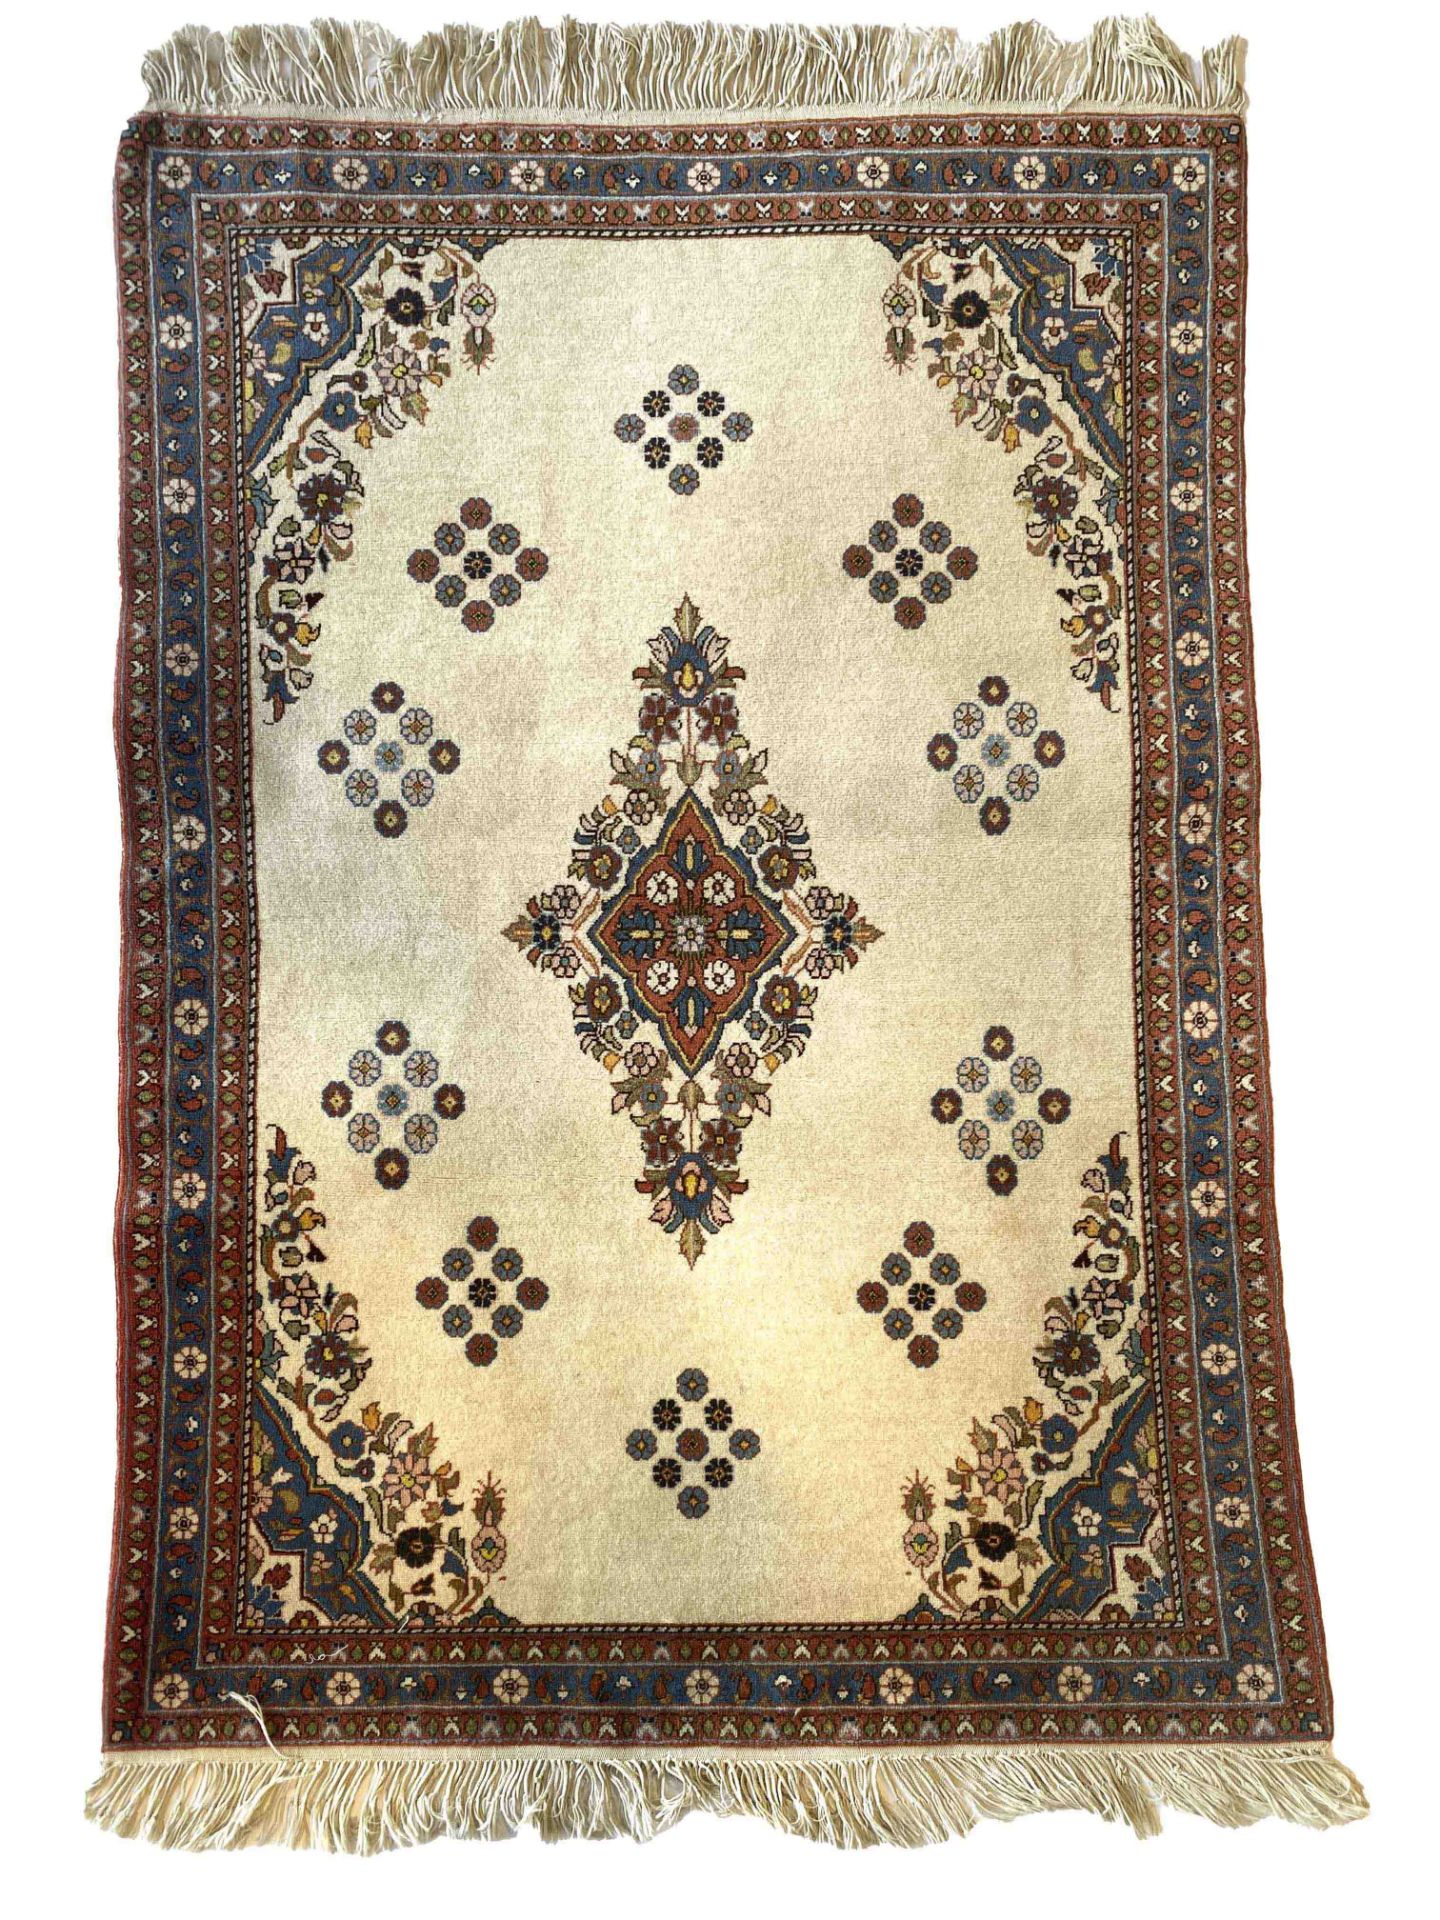 Carpet, Ghom, good condition, 136 x 98 cm - The carpet can only be viewed and collected at another